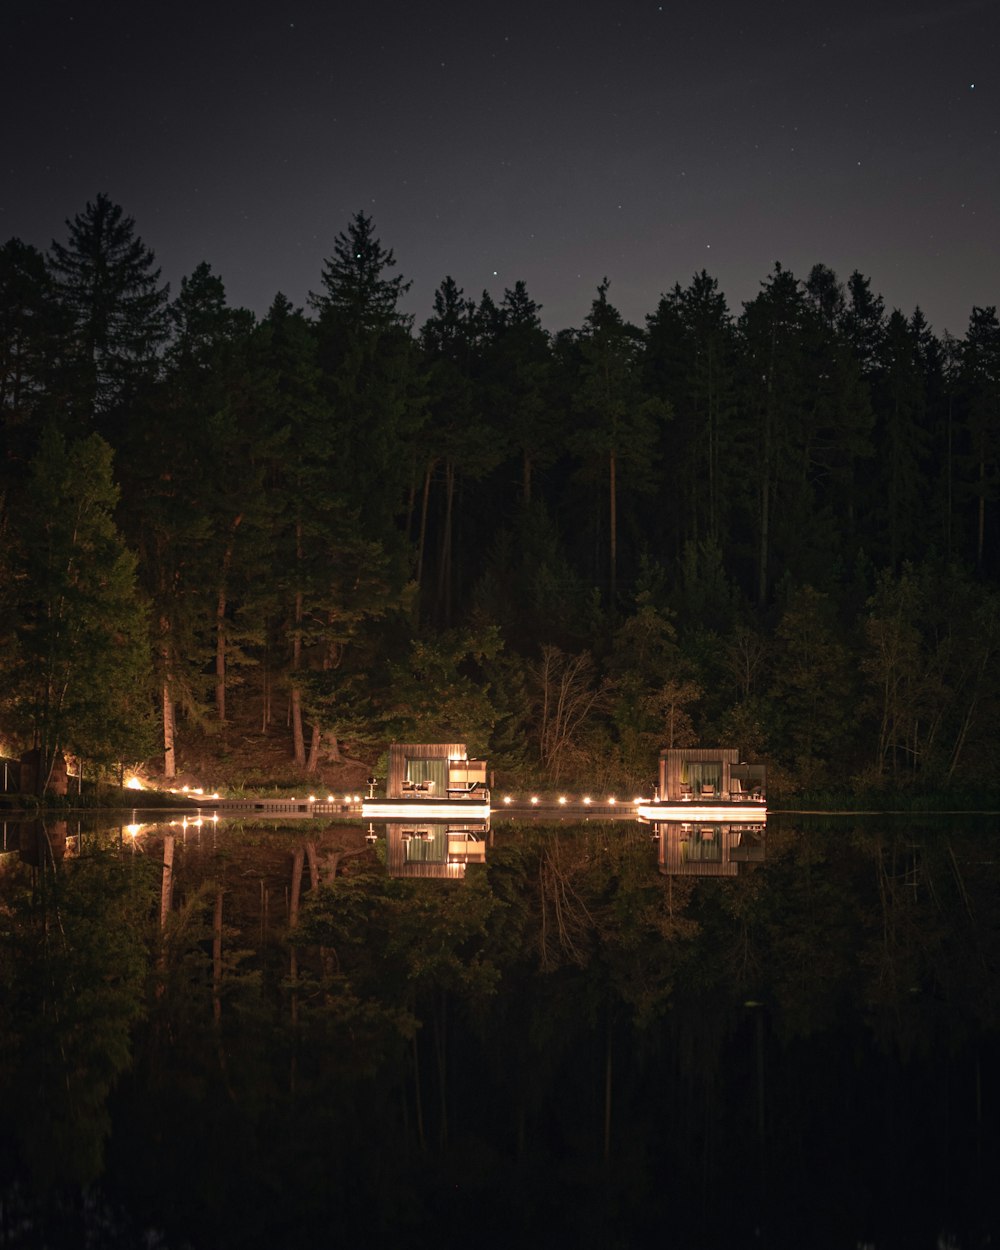 a night time scene of a cabin on a lake